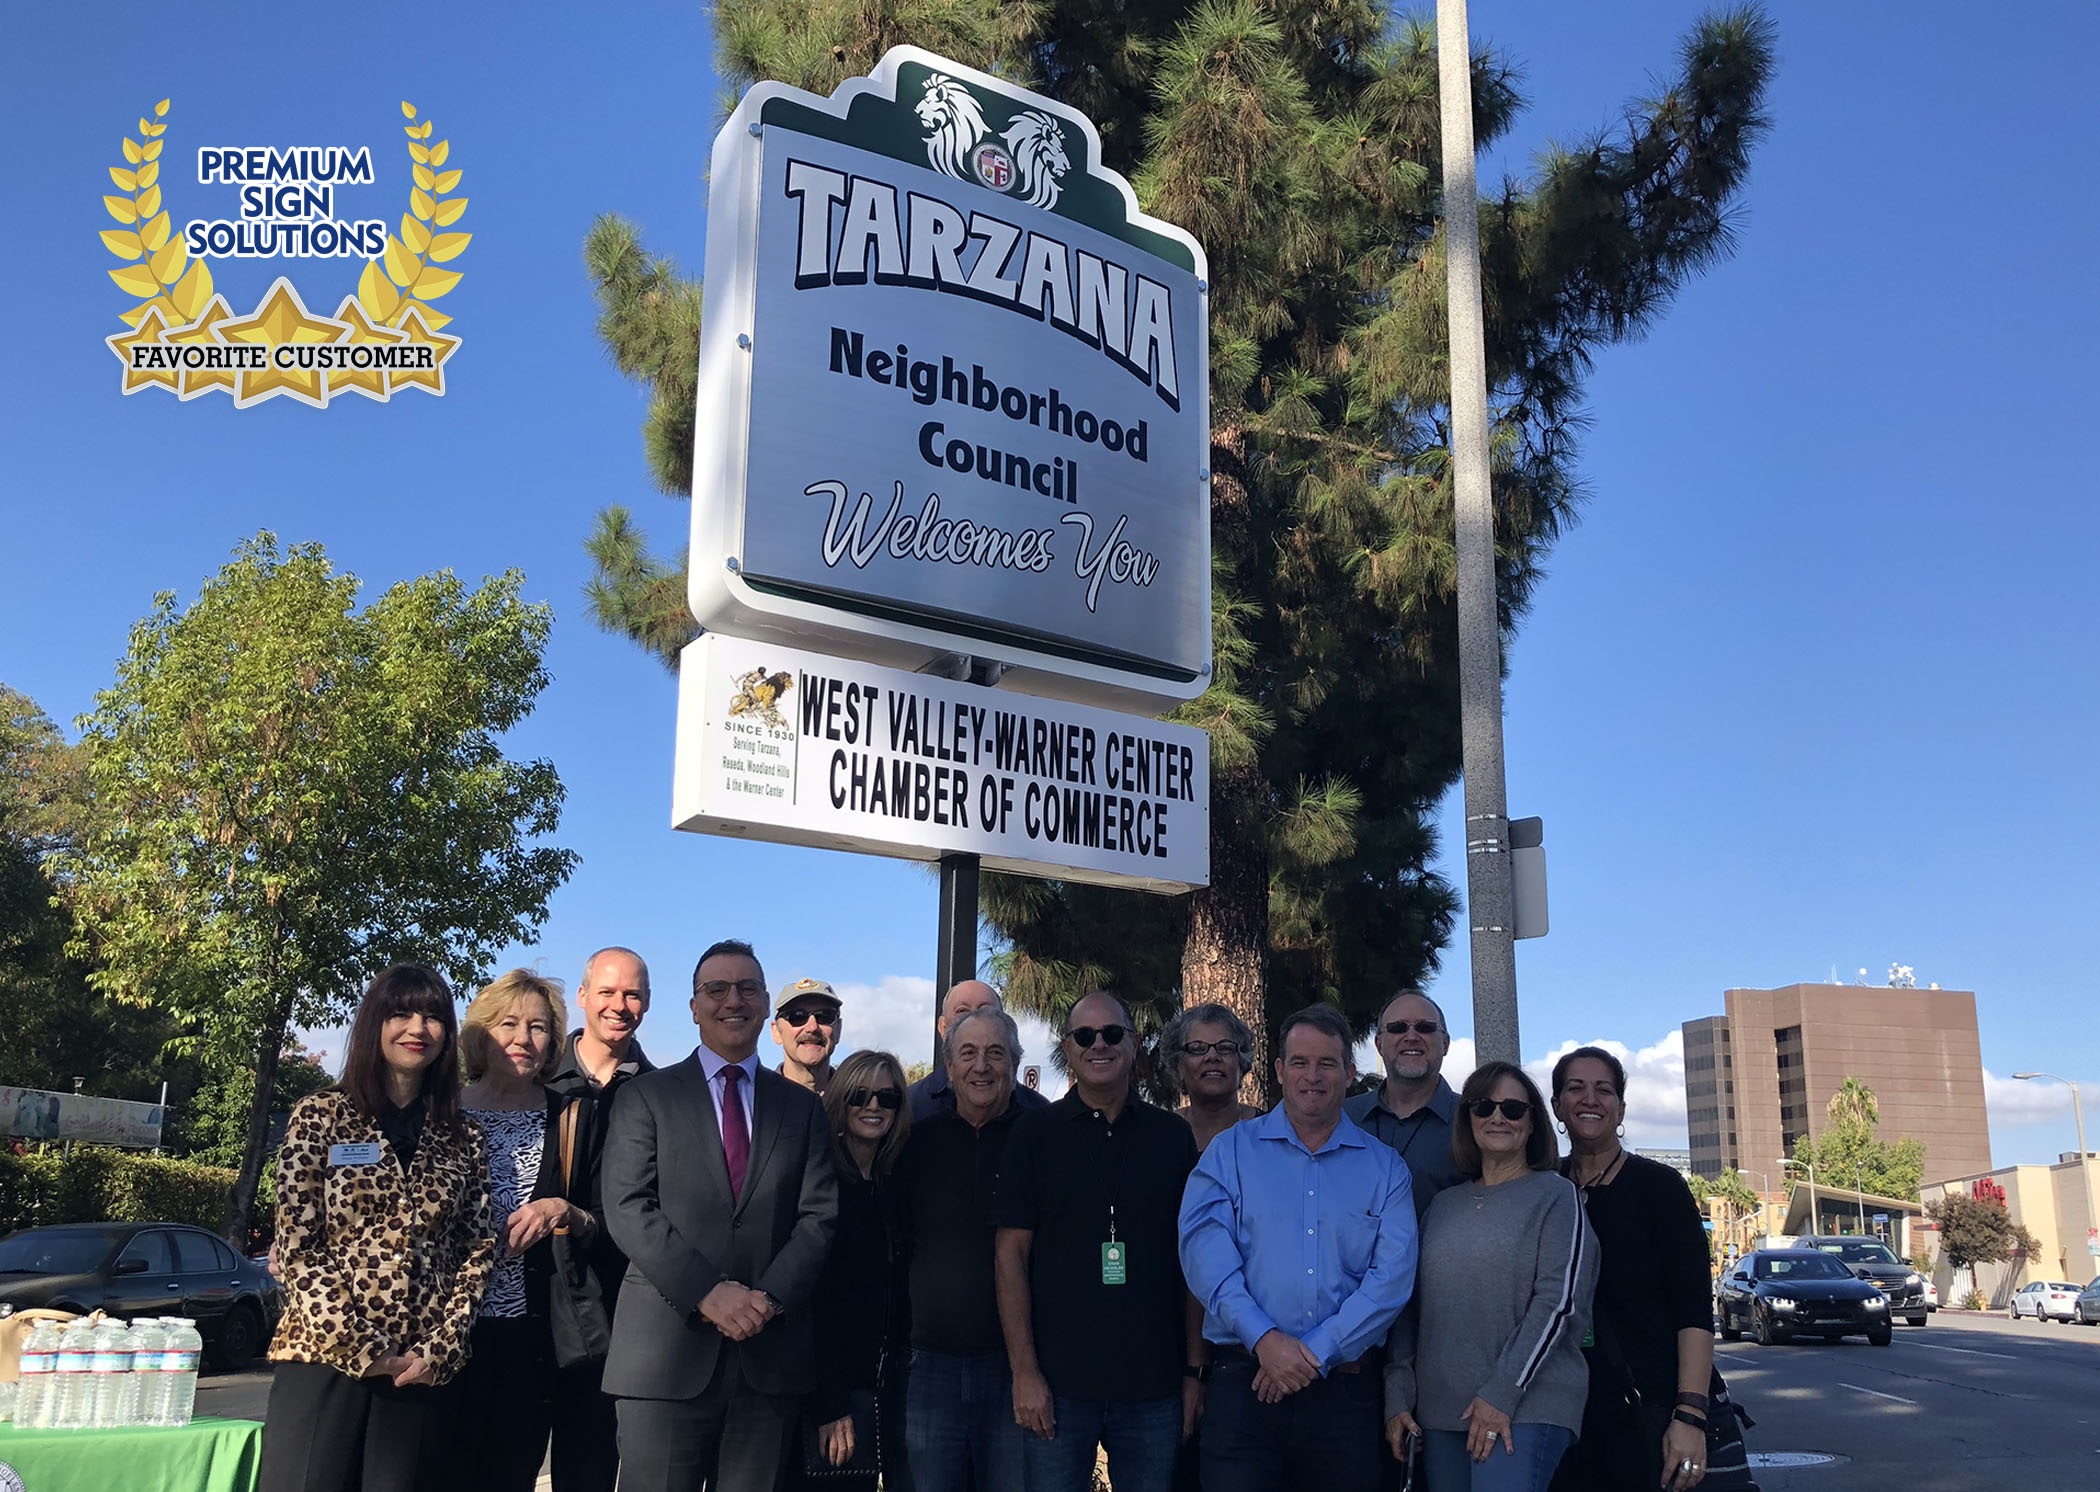 You are currently viewing Our Favorite Customers: Tarzana Neighborhood Council